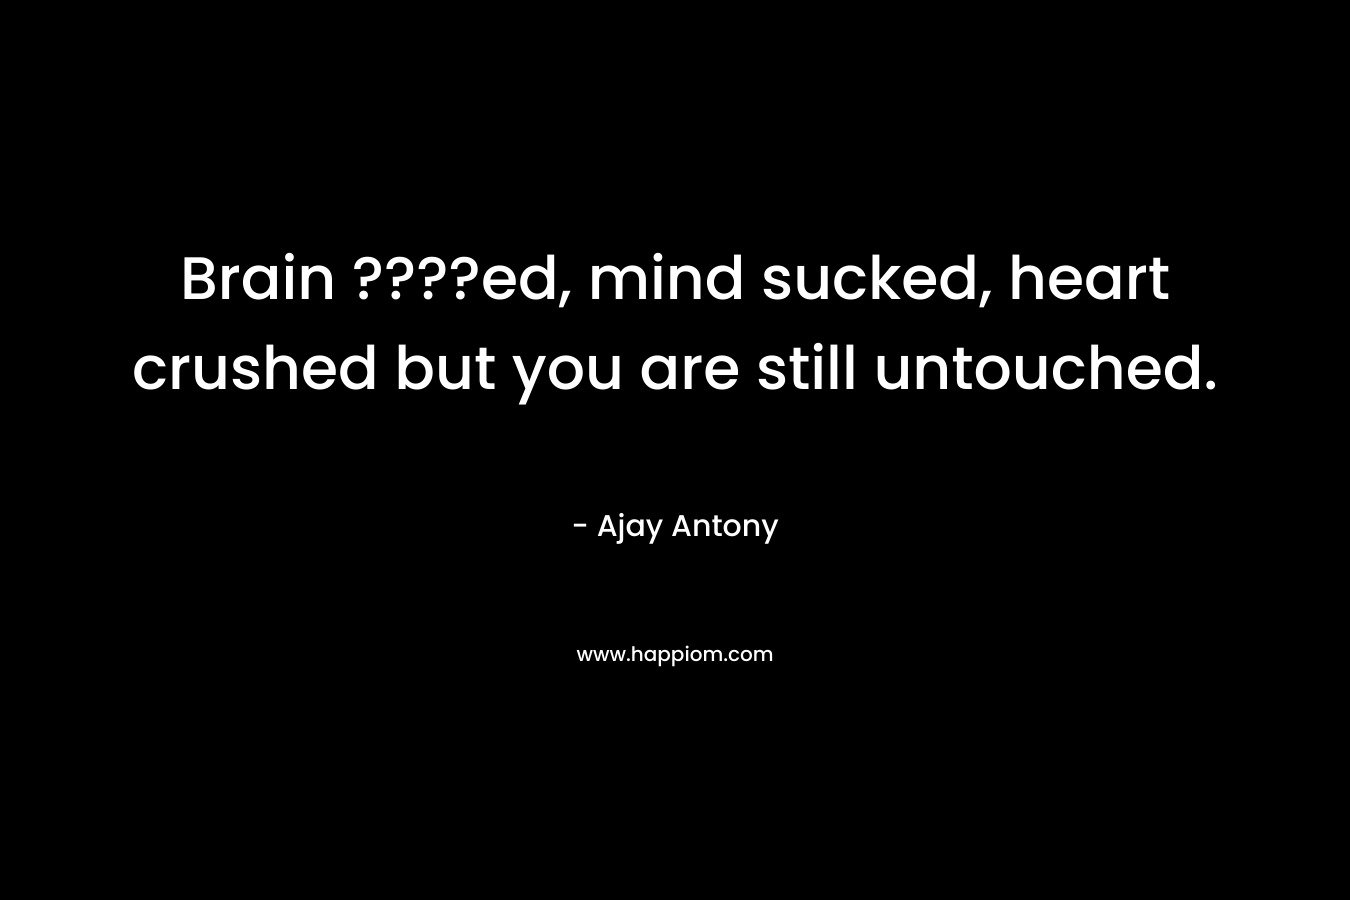 Brain ????ed, mind sucked, heart crushed but you are still untouched. – Ajay Antony